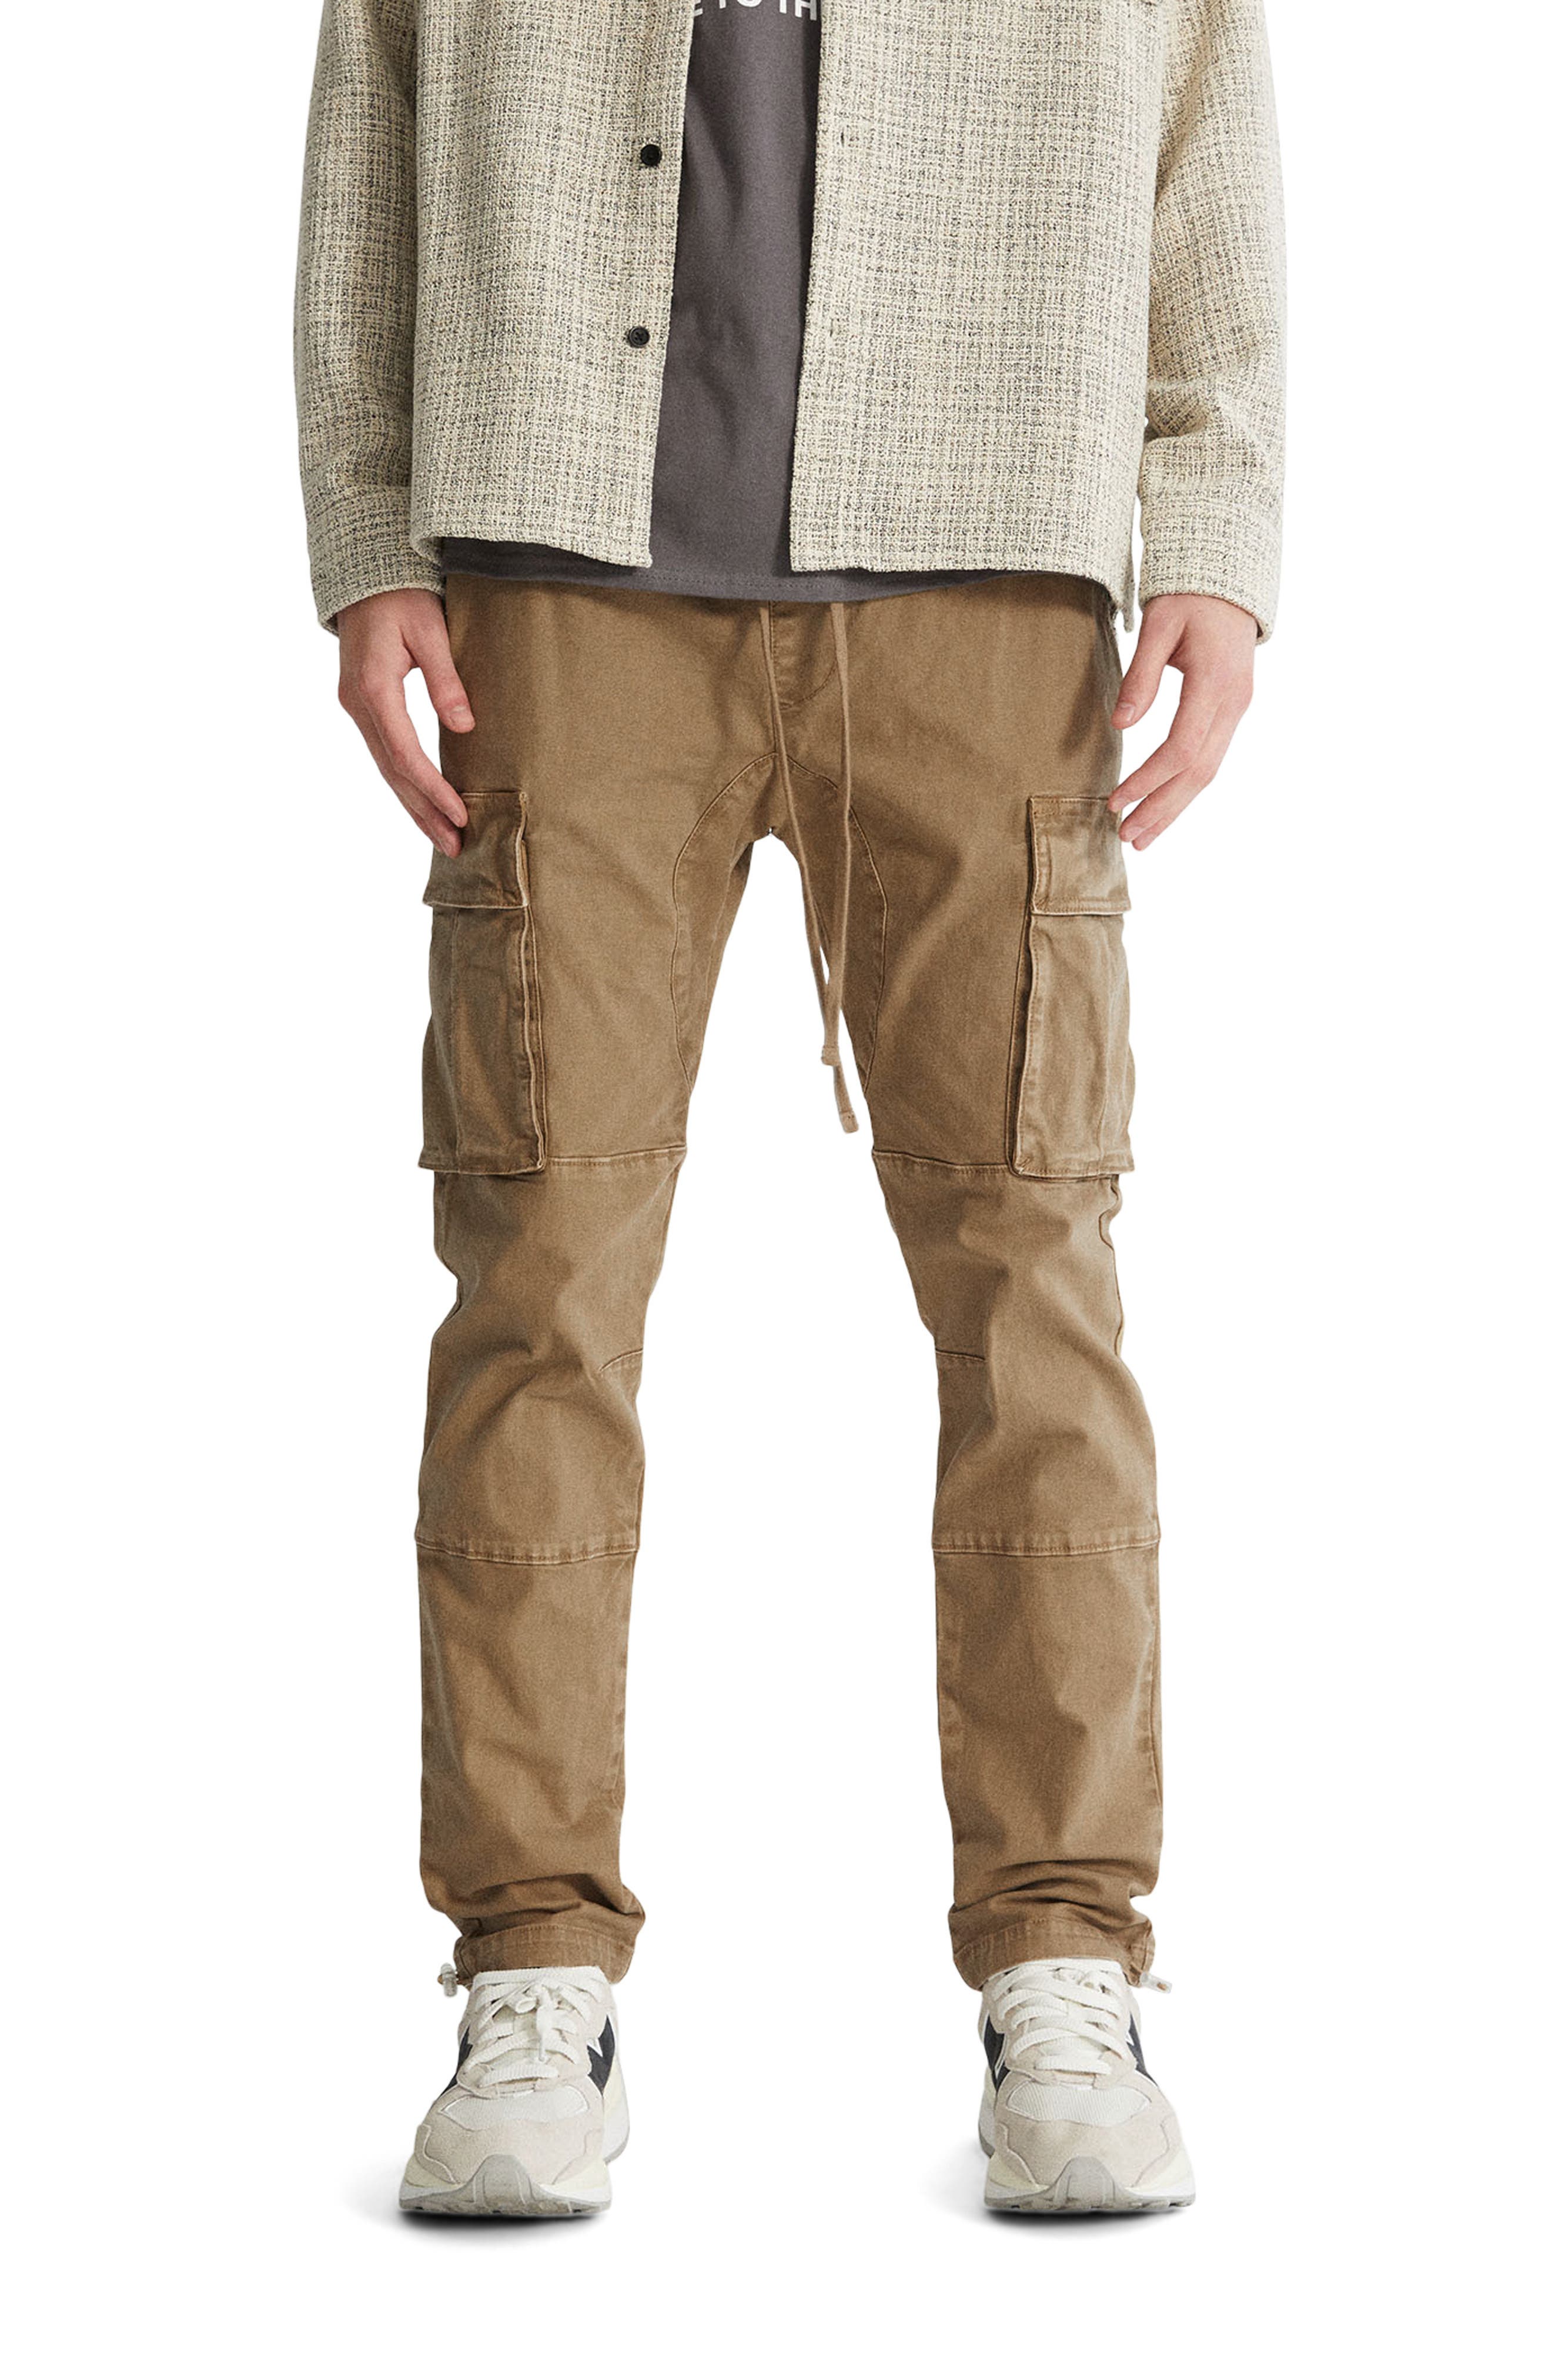 Mens Clothing Trousers DIESEL Synthetic Vintage Cargo Trousers in Natural for Men Slacks and Chinos 